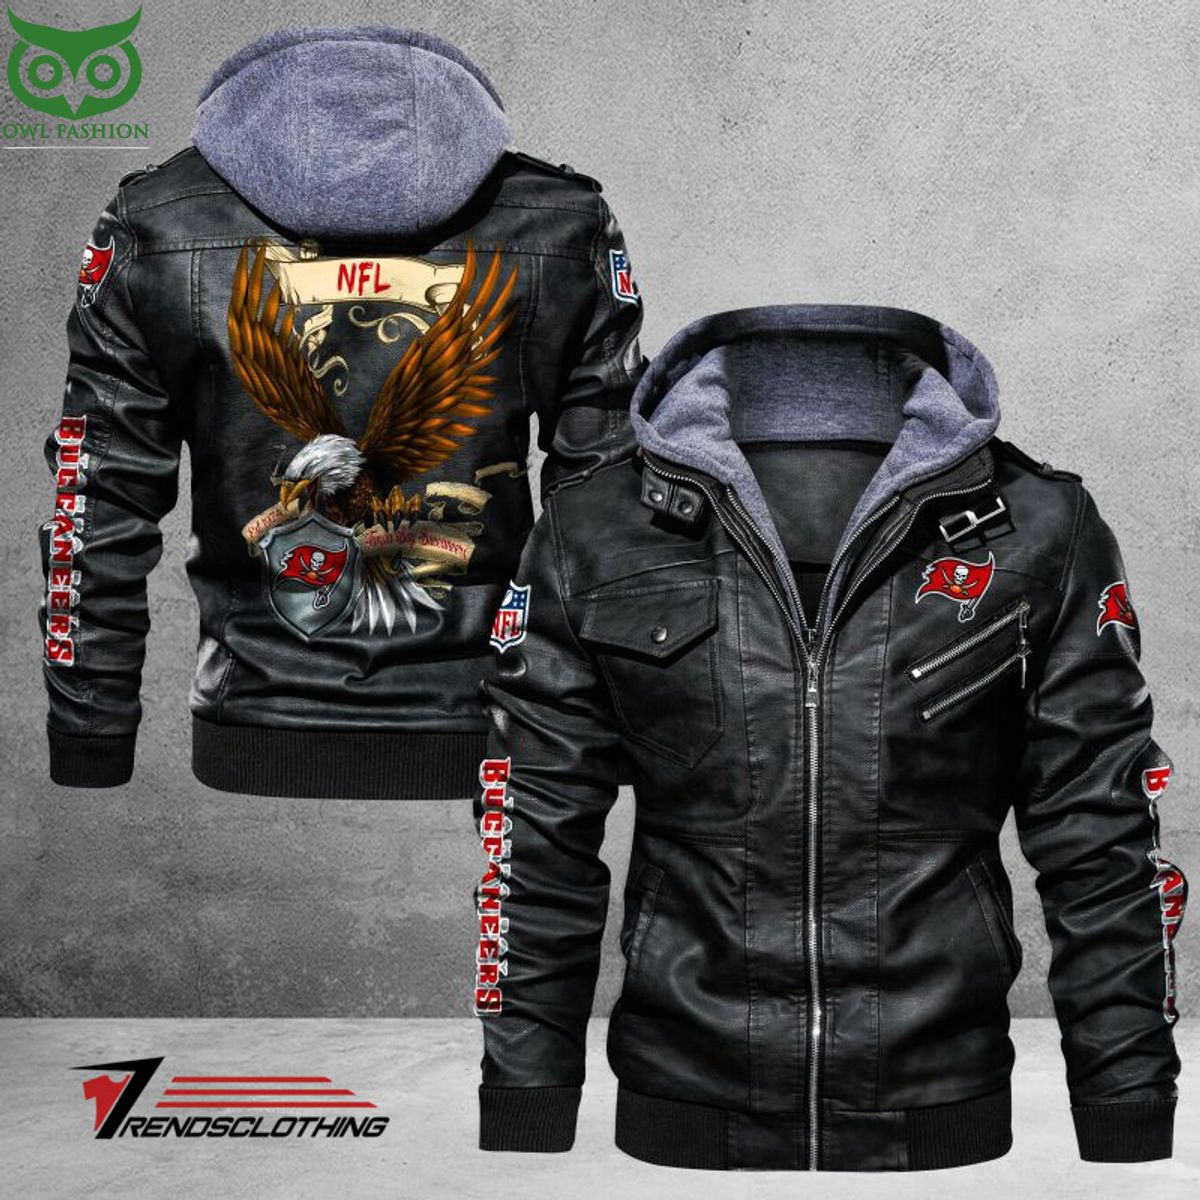 Tampa Bay Buccaneers Trending Jacket Shop - Owl Fashion 2D Leather